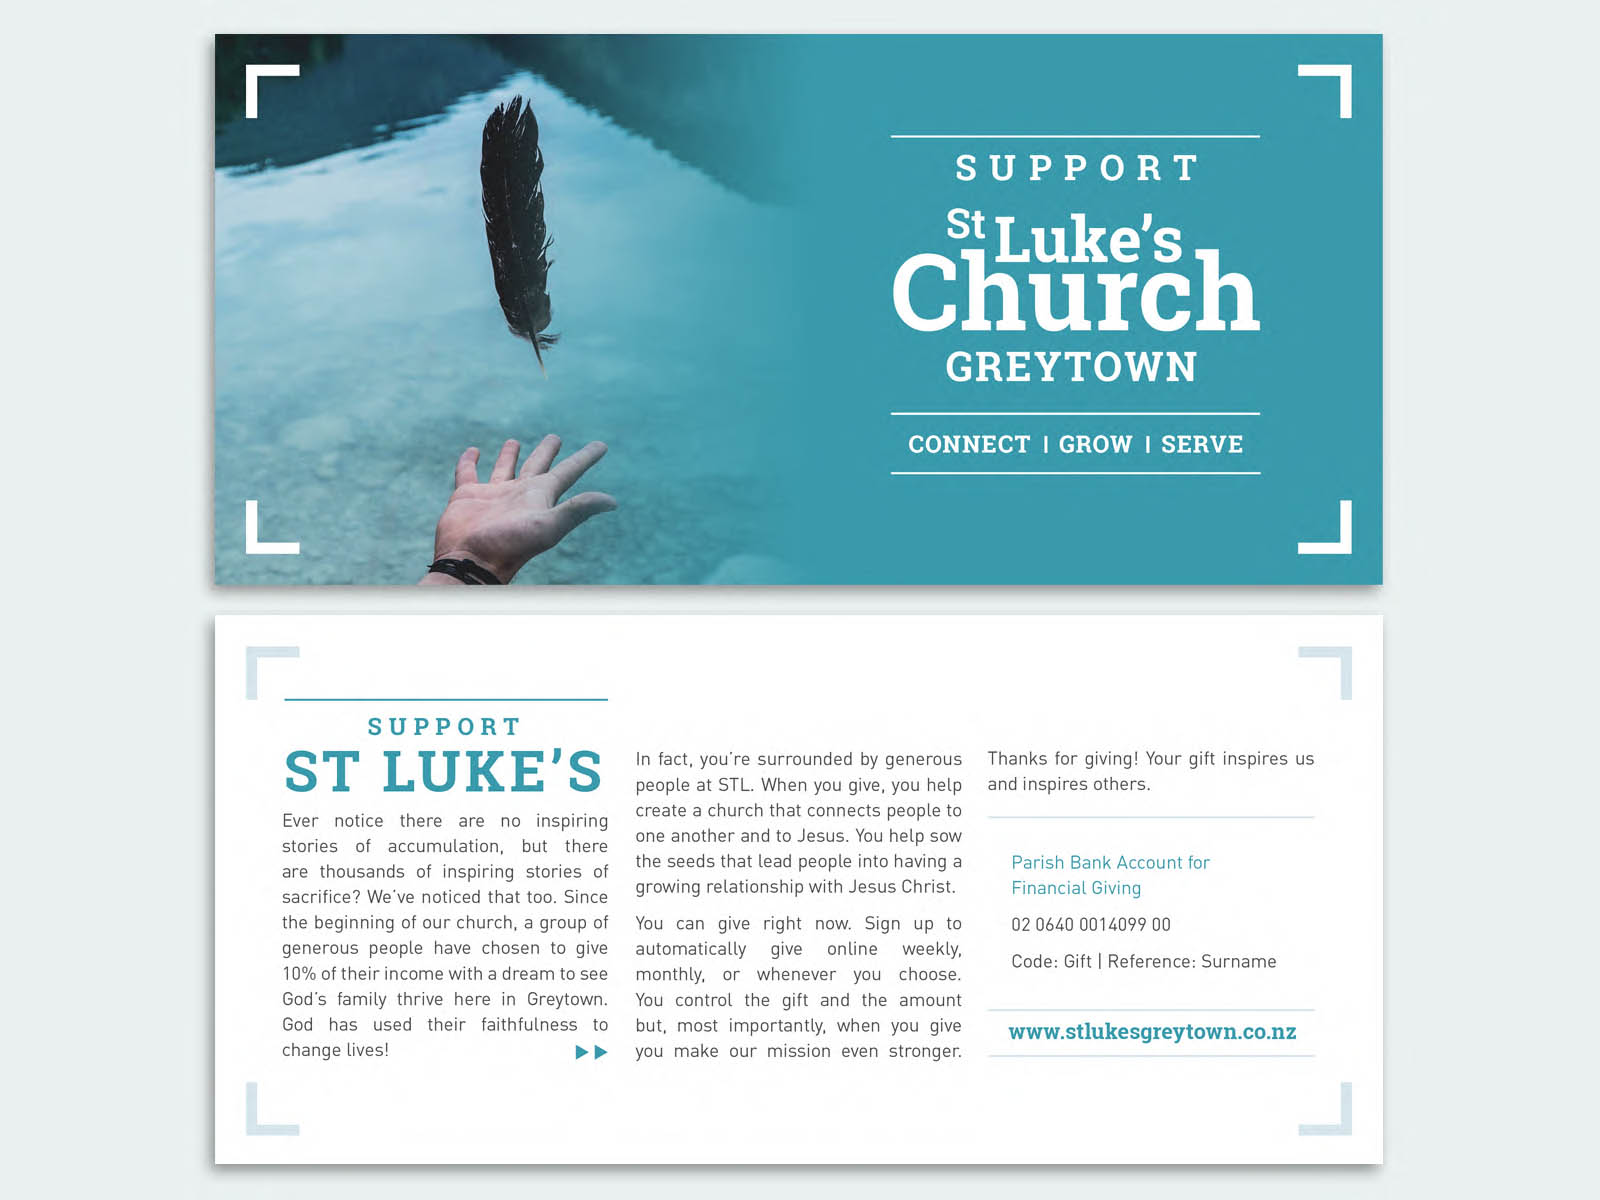 Photo shows St Luke's flyer which talks about how to support St Luke's Church in Greytown financially.